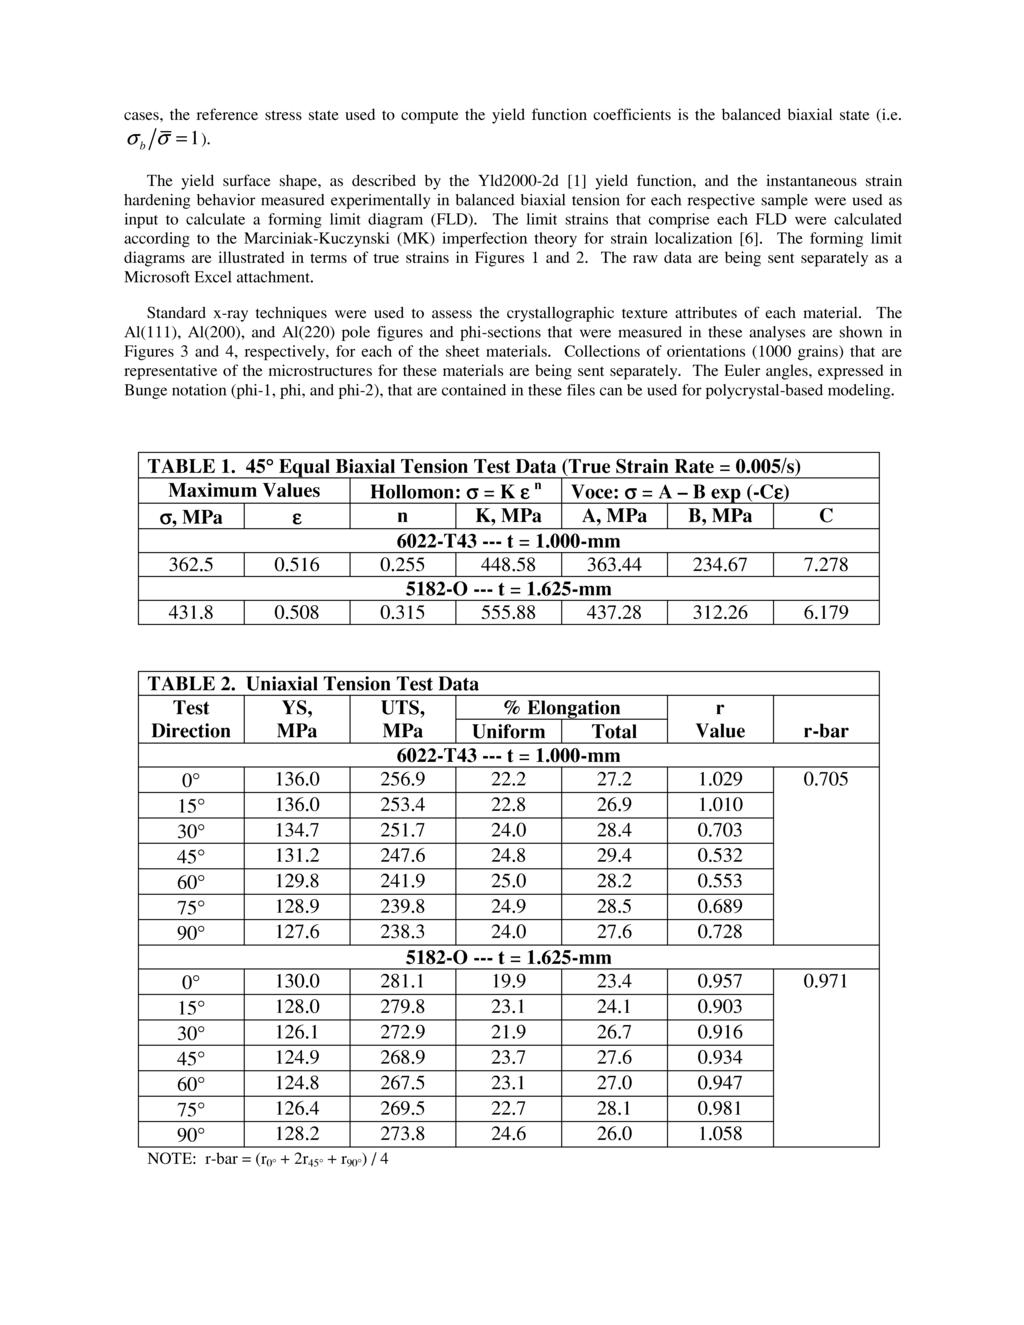 cases, the reference stress state used to compute the yield function coefficients is the balanced biaxial state (i.e. The yield surface shape, as described by the Yld2-2d [1] yield function, and the